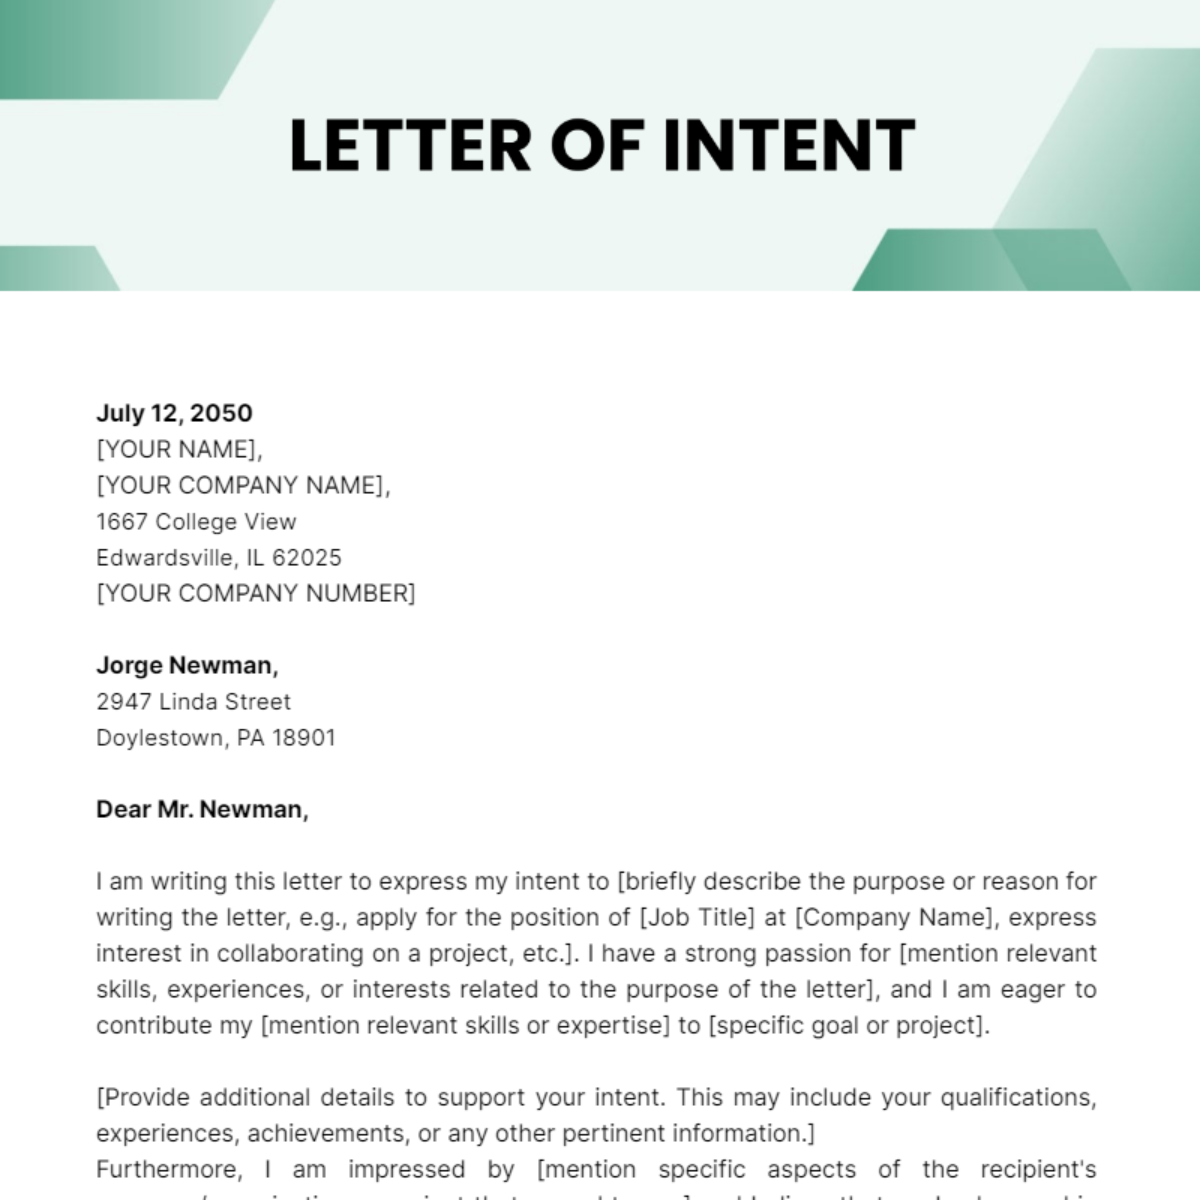 Letter of Intent Template